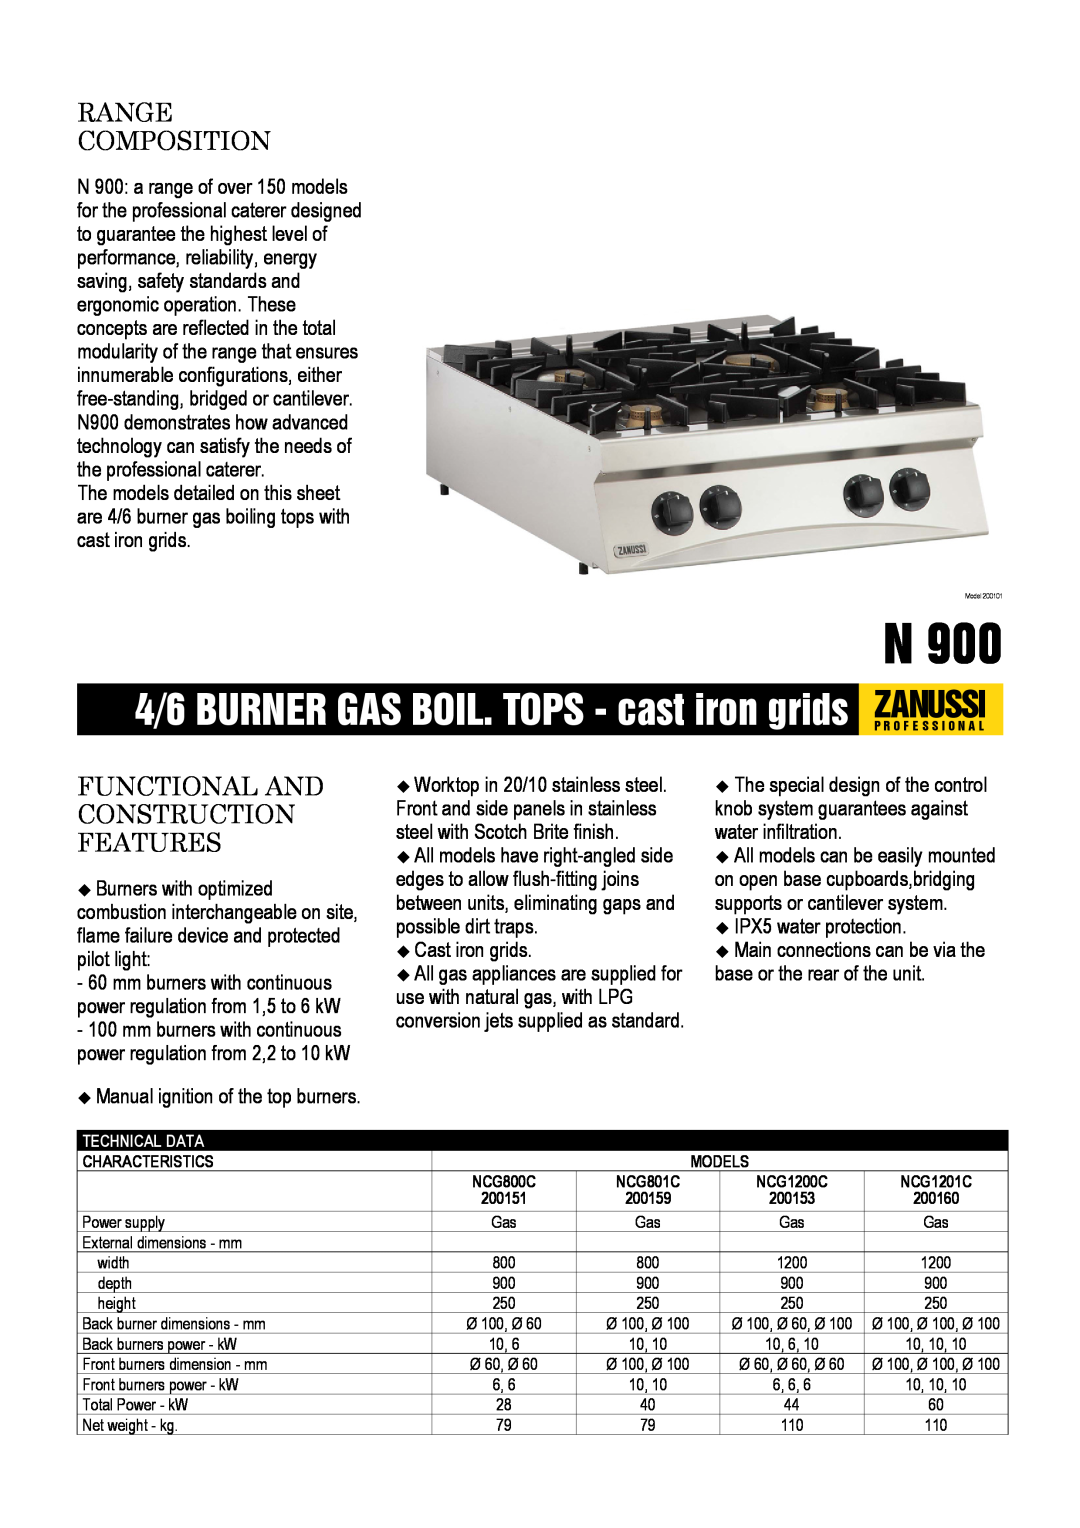 Zanussi NCG800C dimensions Range Composition, Functional And Construction Features, Cast iron grids, IPX5 water protection 